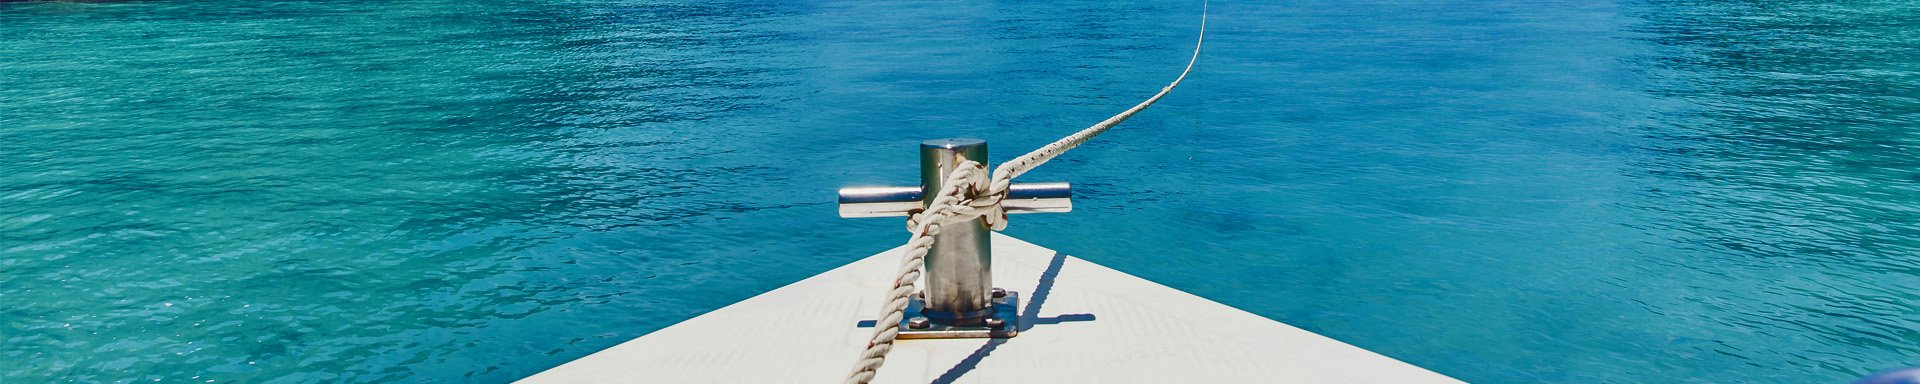 Anchor Line from Bow of Boat